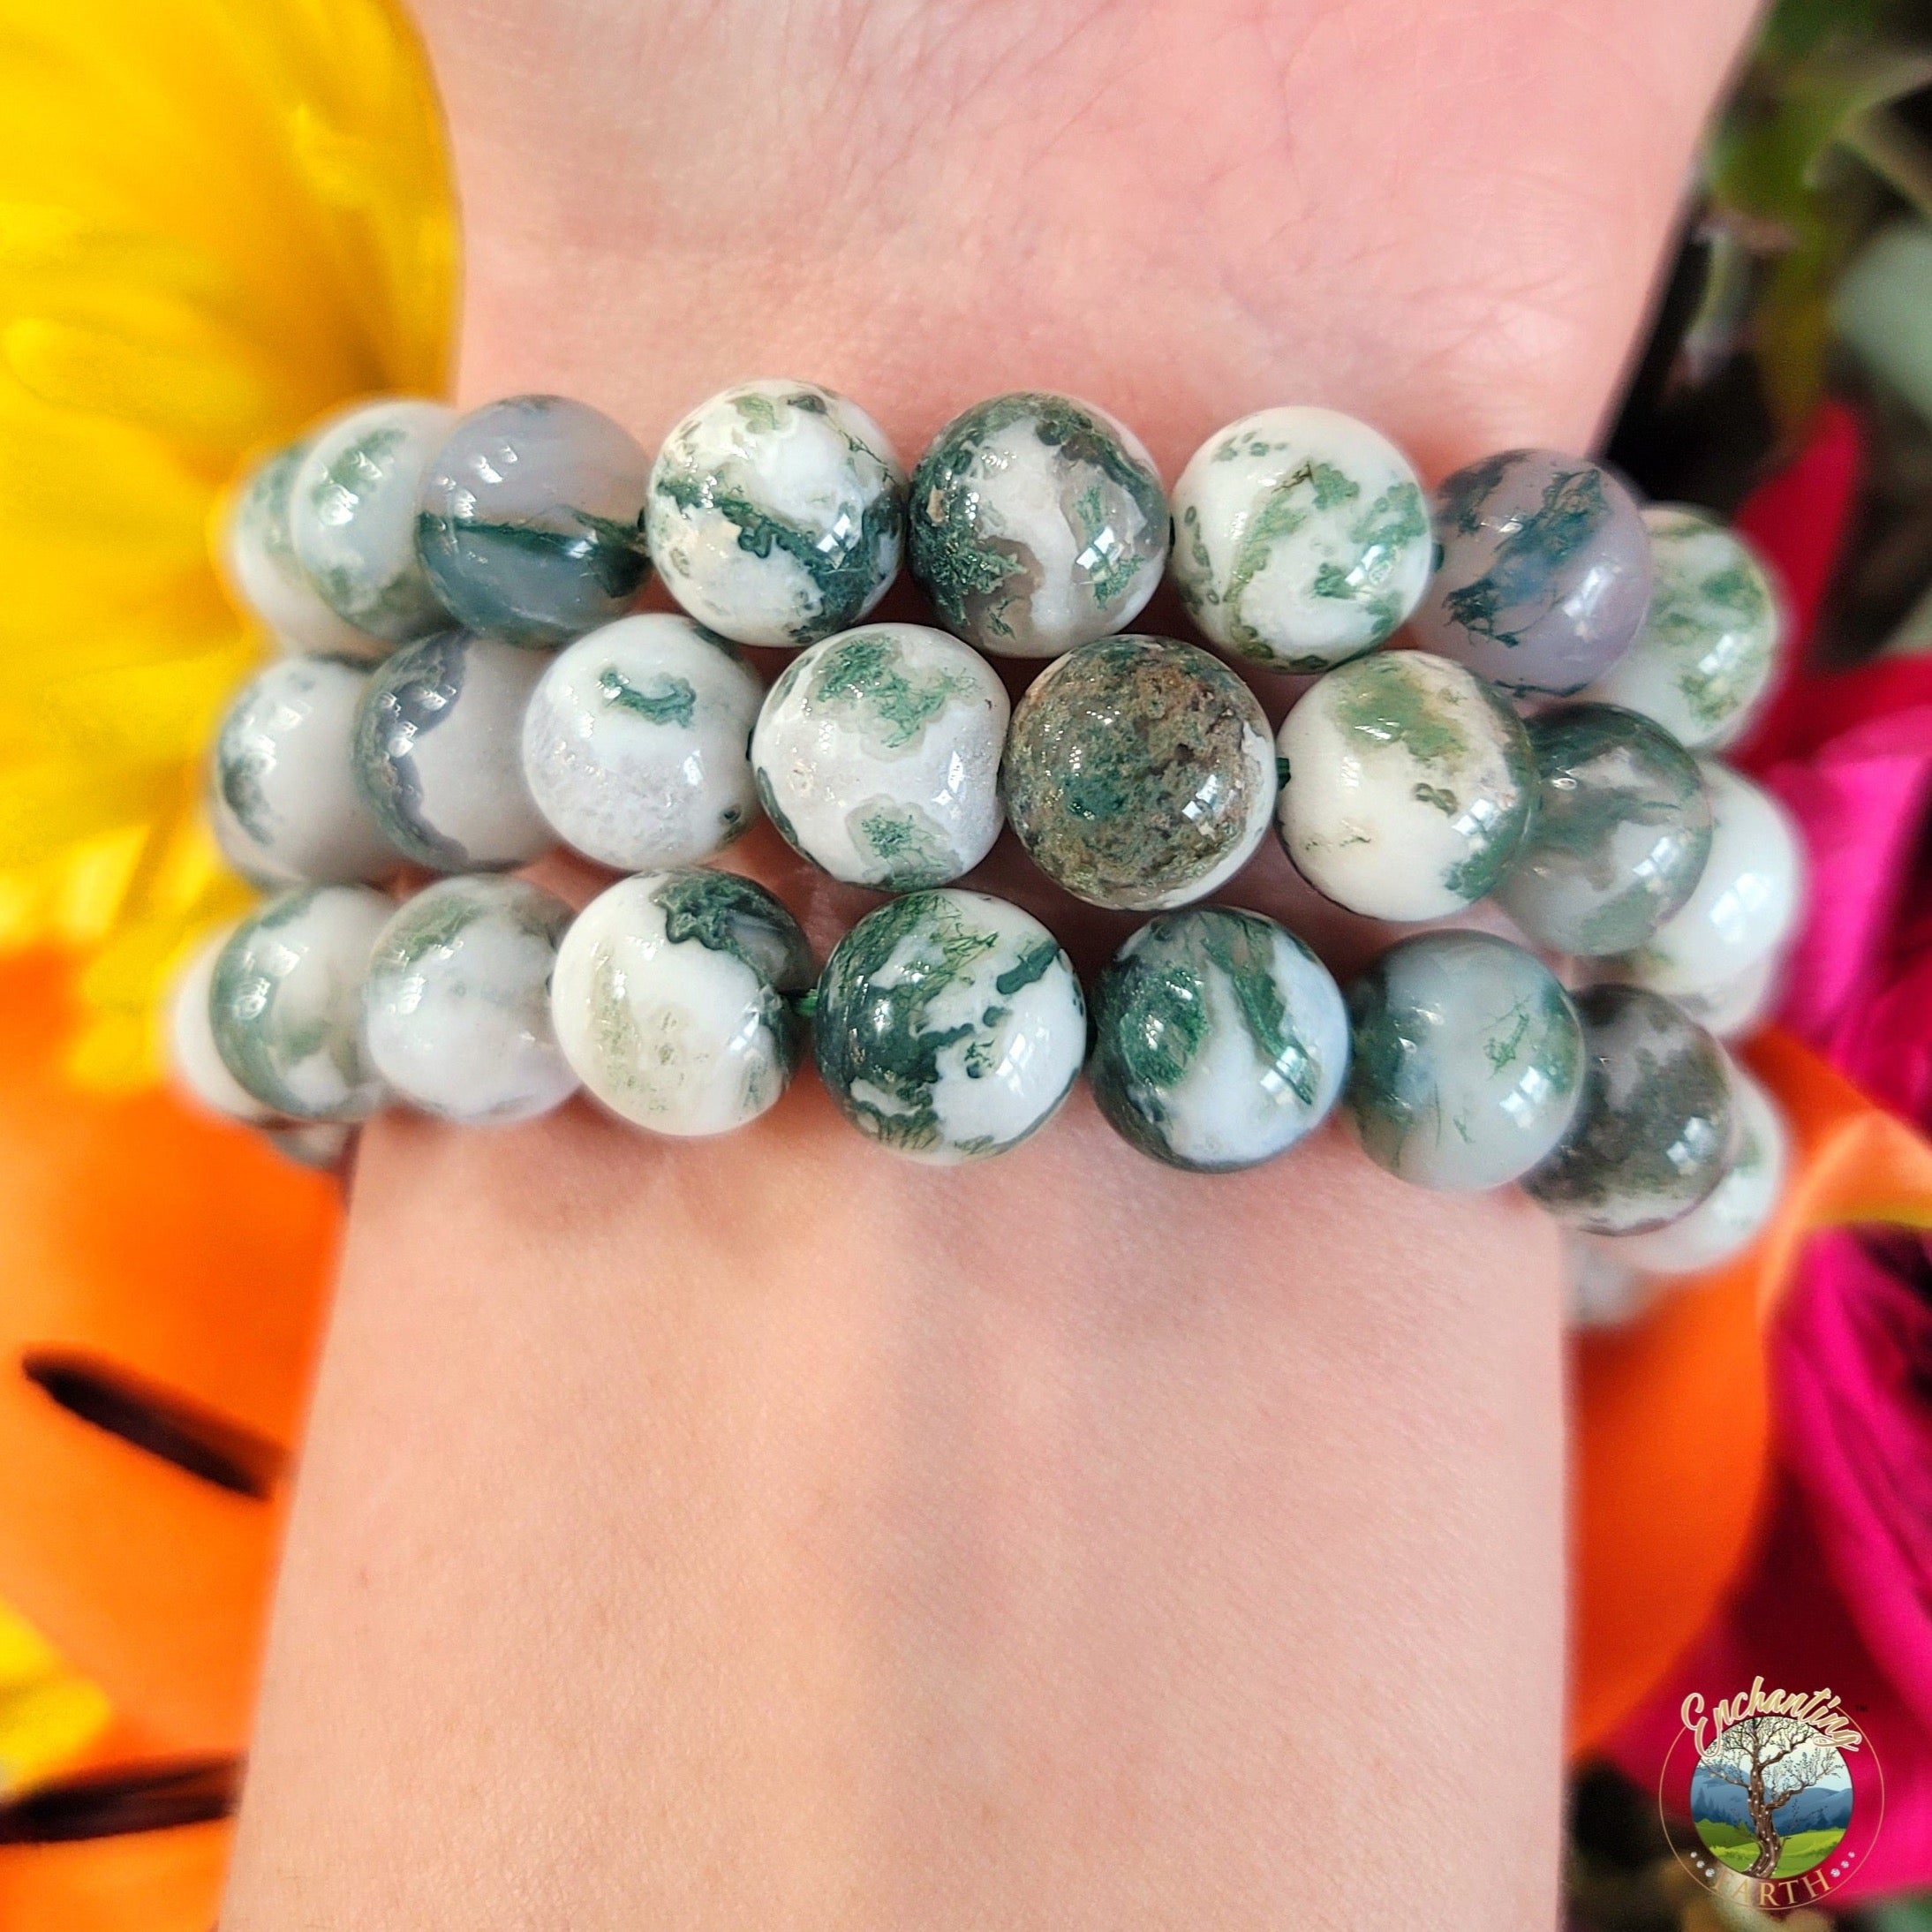 Moss Agate Bracelet for Balance, Healing and Overcoming Addictions